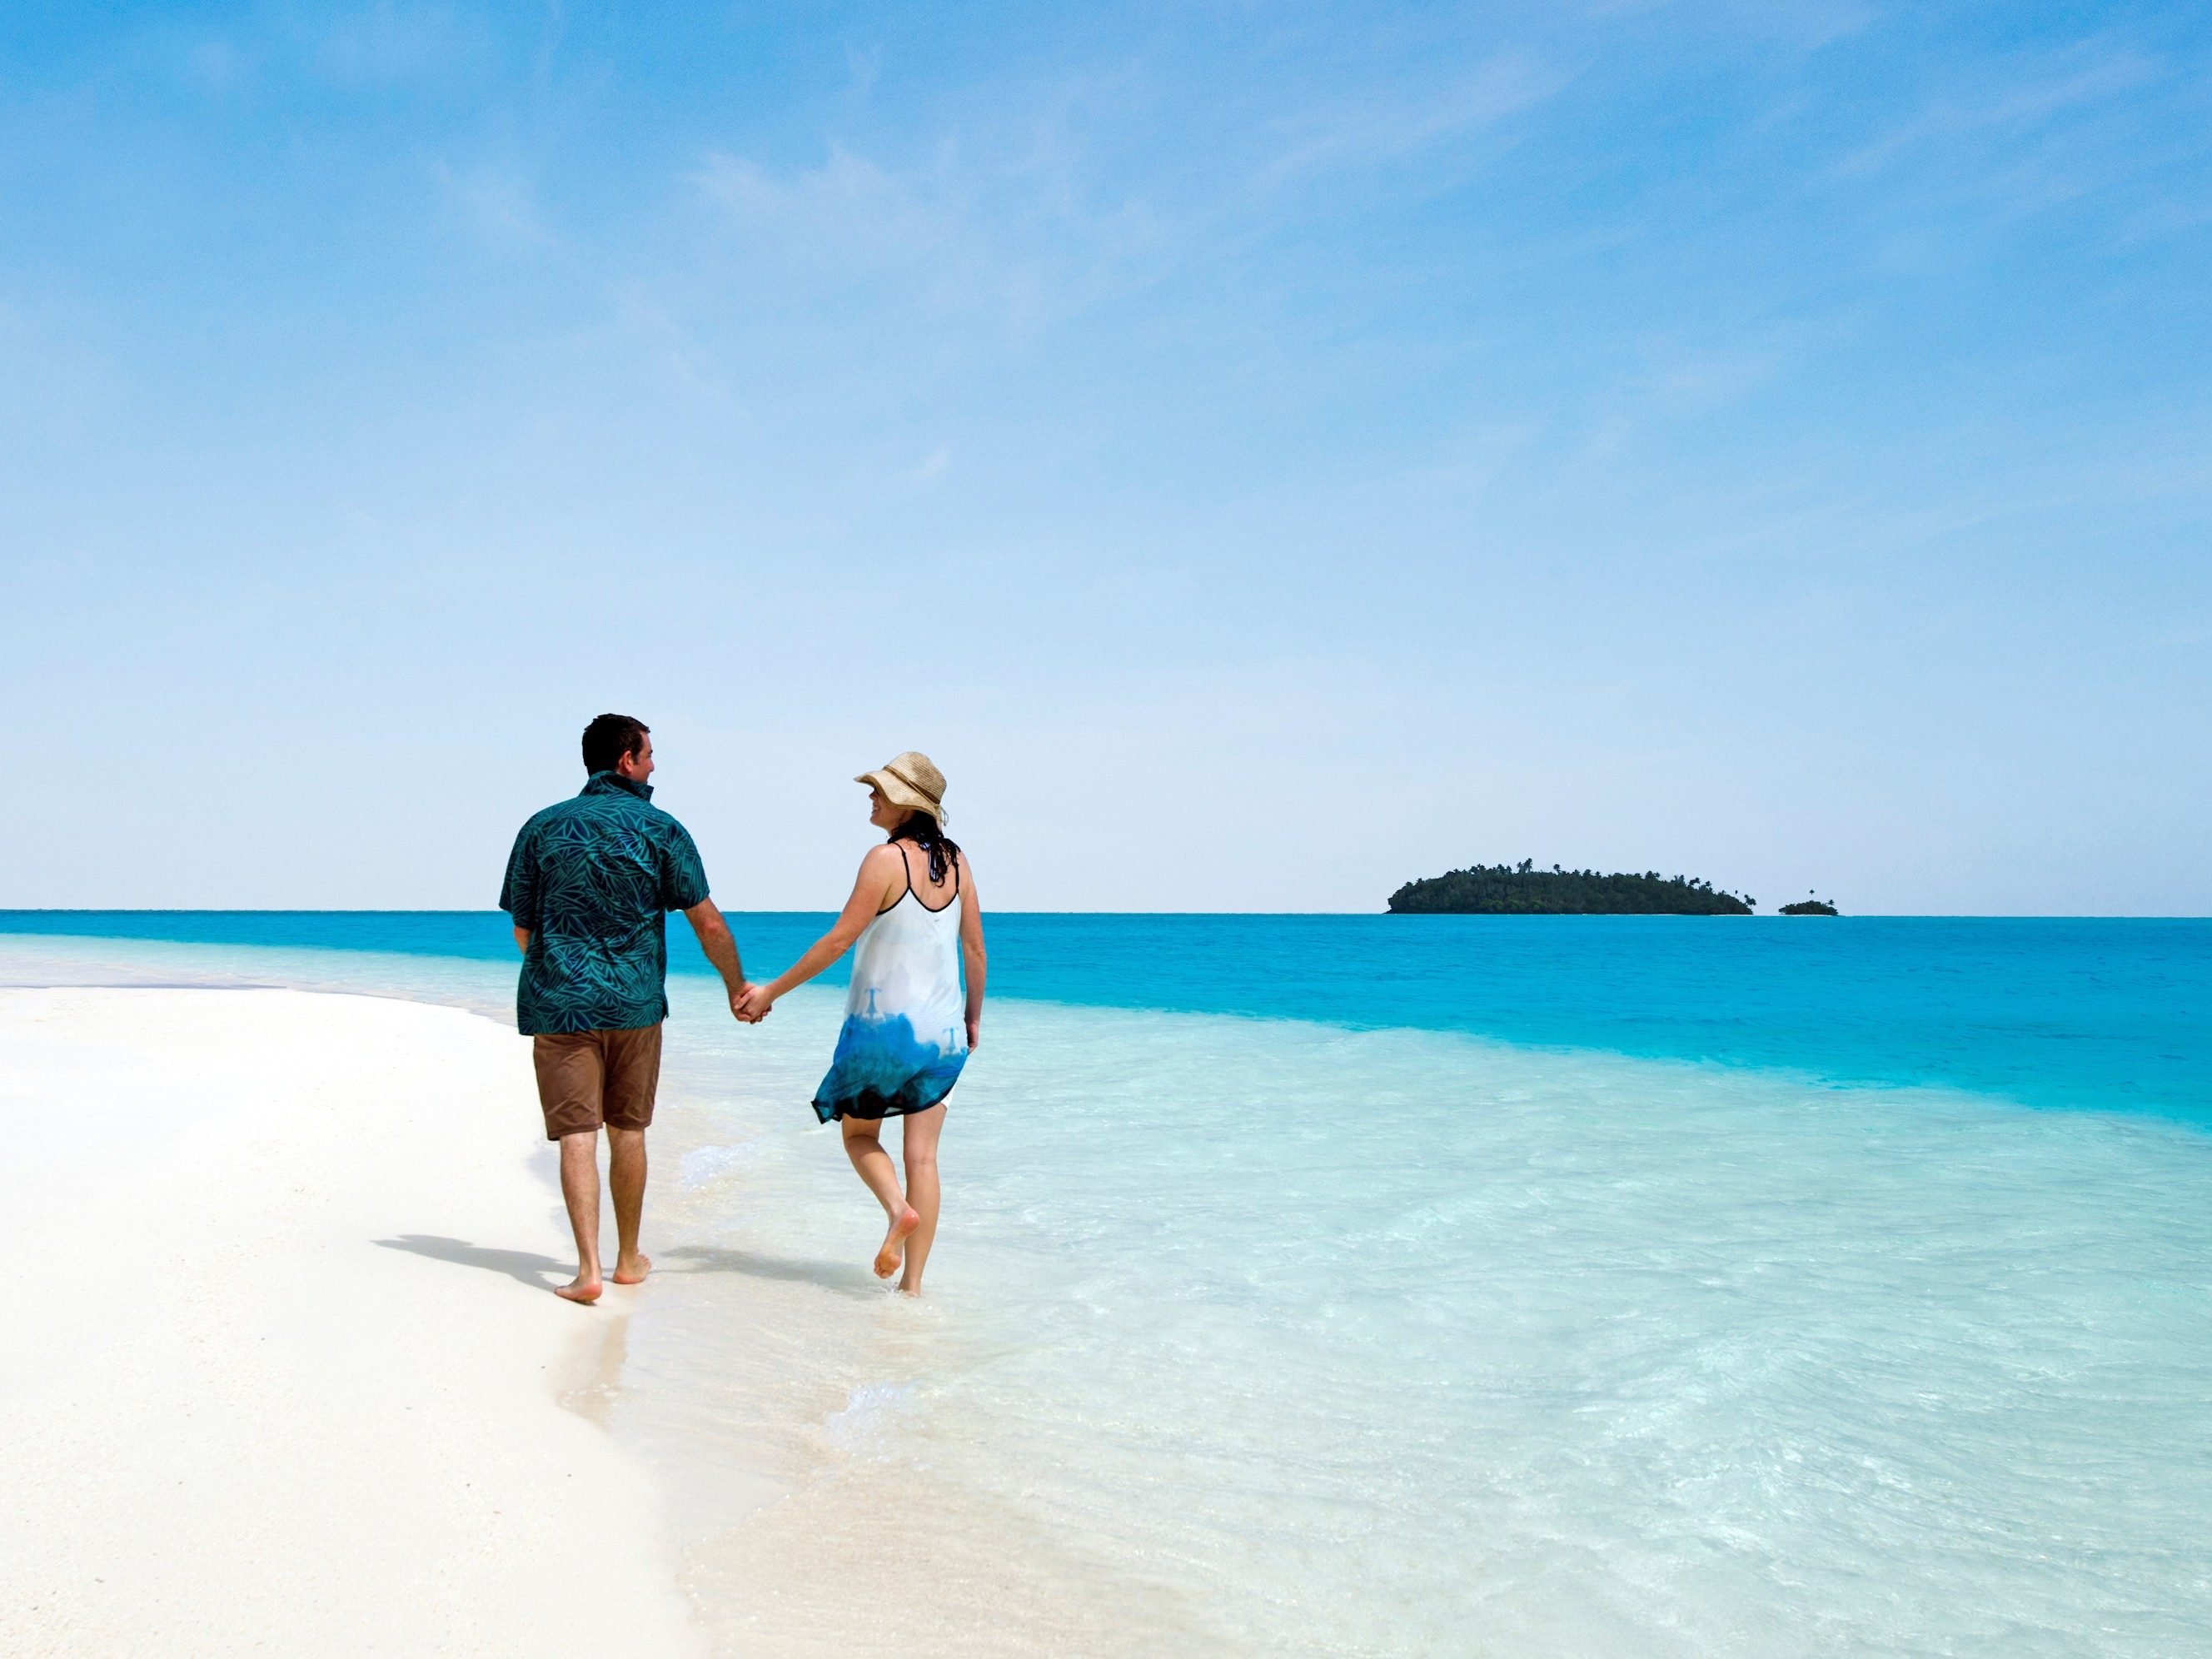 World's 10 Sexiest Places: Cook Islands, the South Pacific